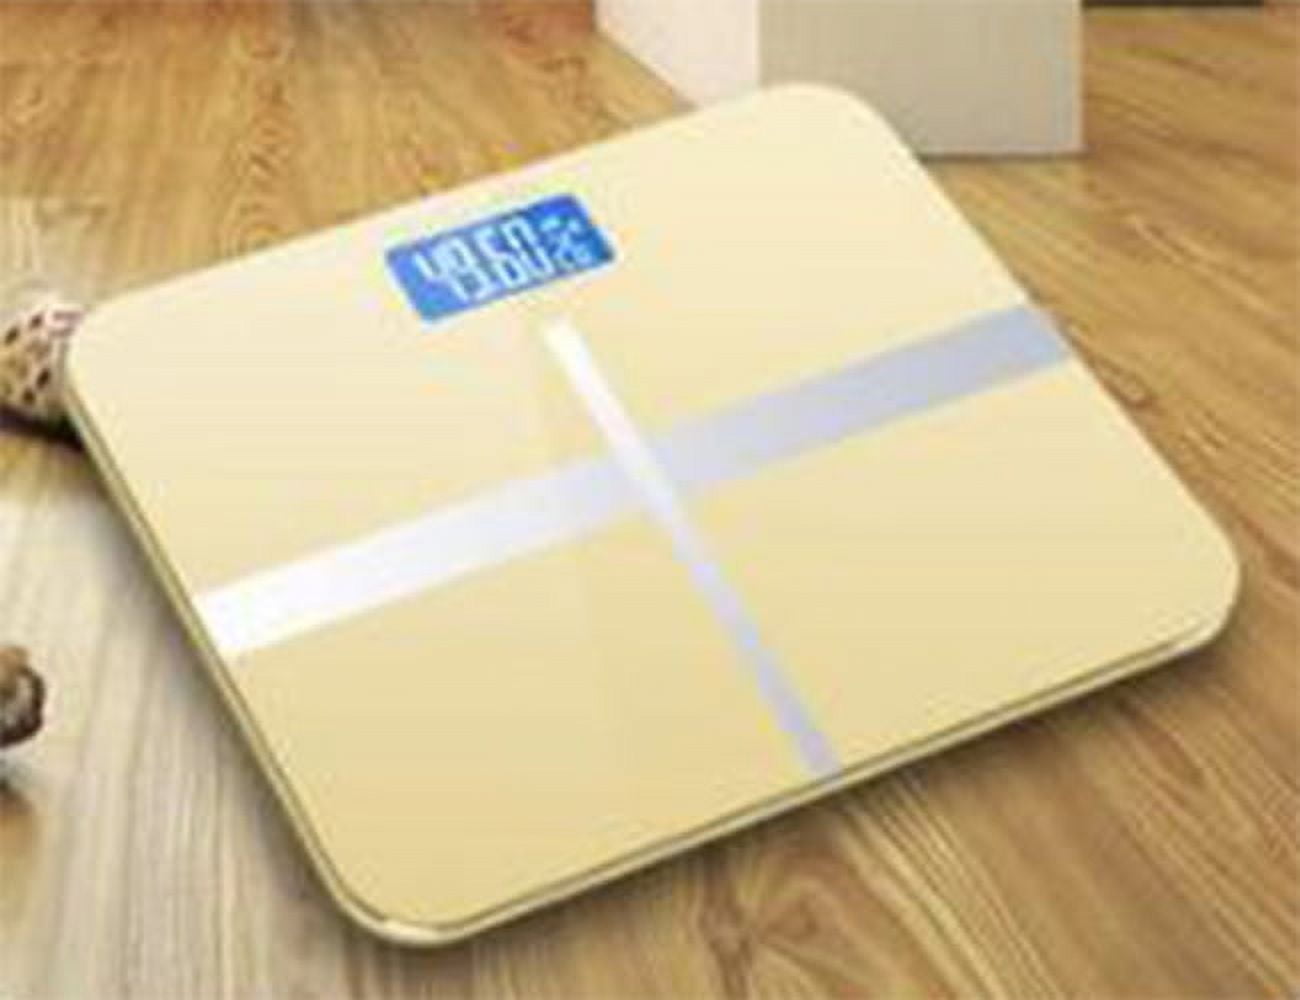 SOONHUA Digital Body Weight Scale Accurate Measure Weighing Scale for –  BABACLICK